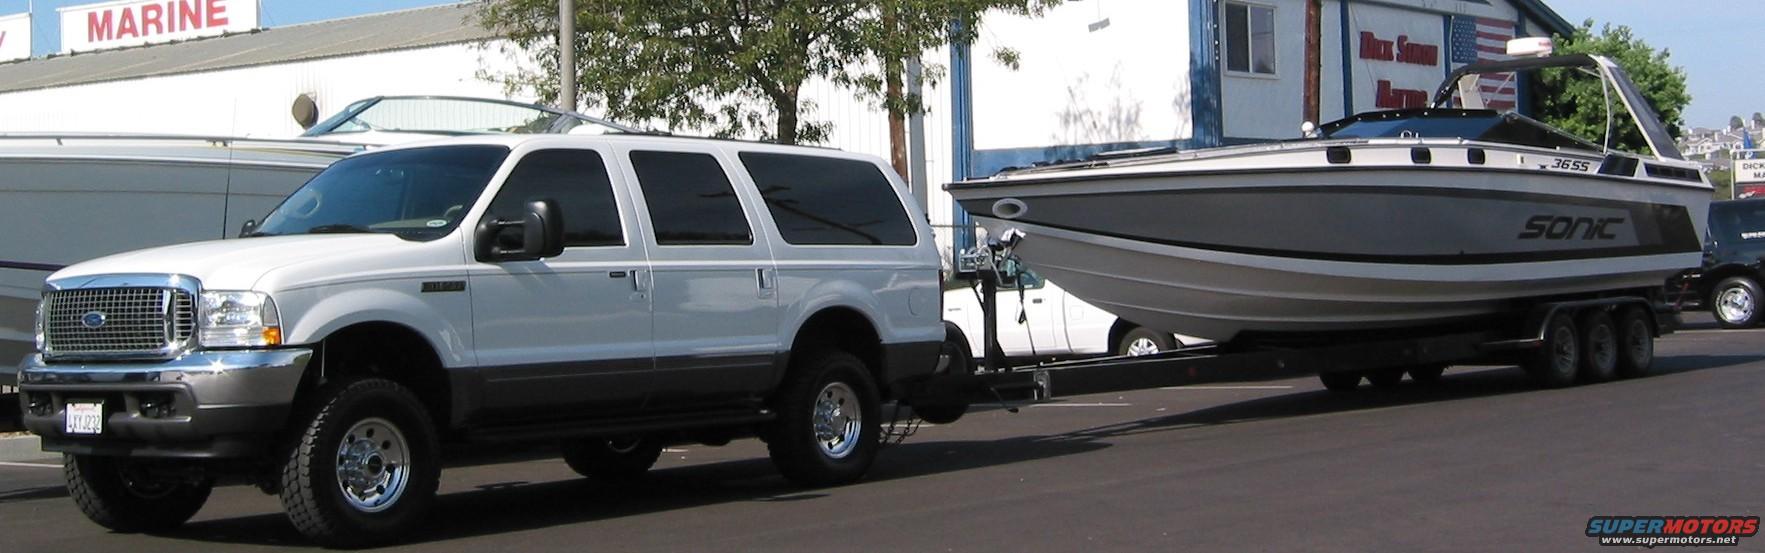 Towing capacity ford excursion 7.3 diesel #1